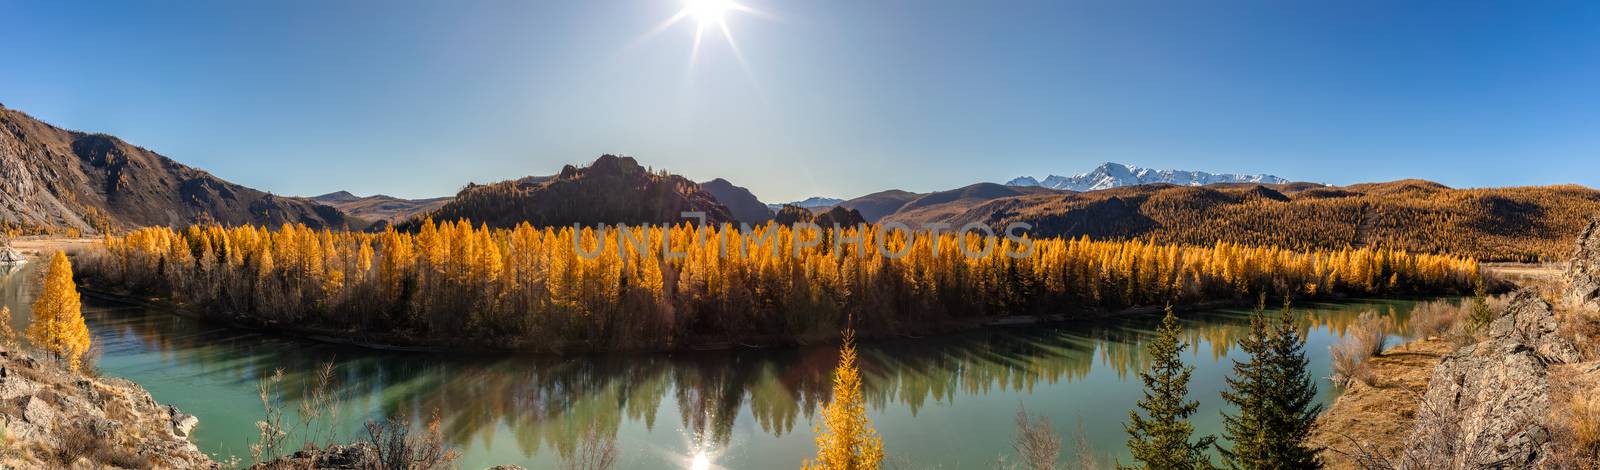 Scenic panoramic view of a river. Snowy mountain peaks, hills, and beautiful blue sky as a background. Golden trees and the sun casting their reflection in the river. Altai mountains, Siberia, Russia by DamantisZ